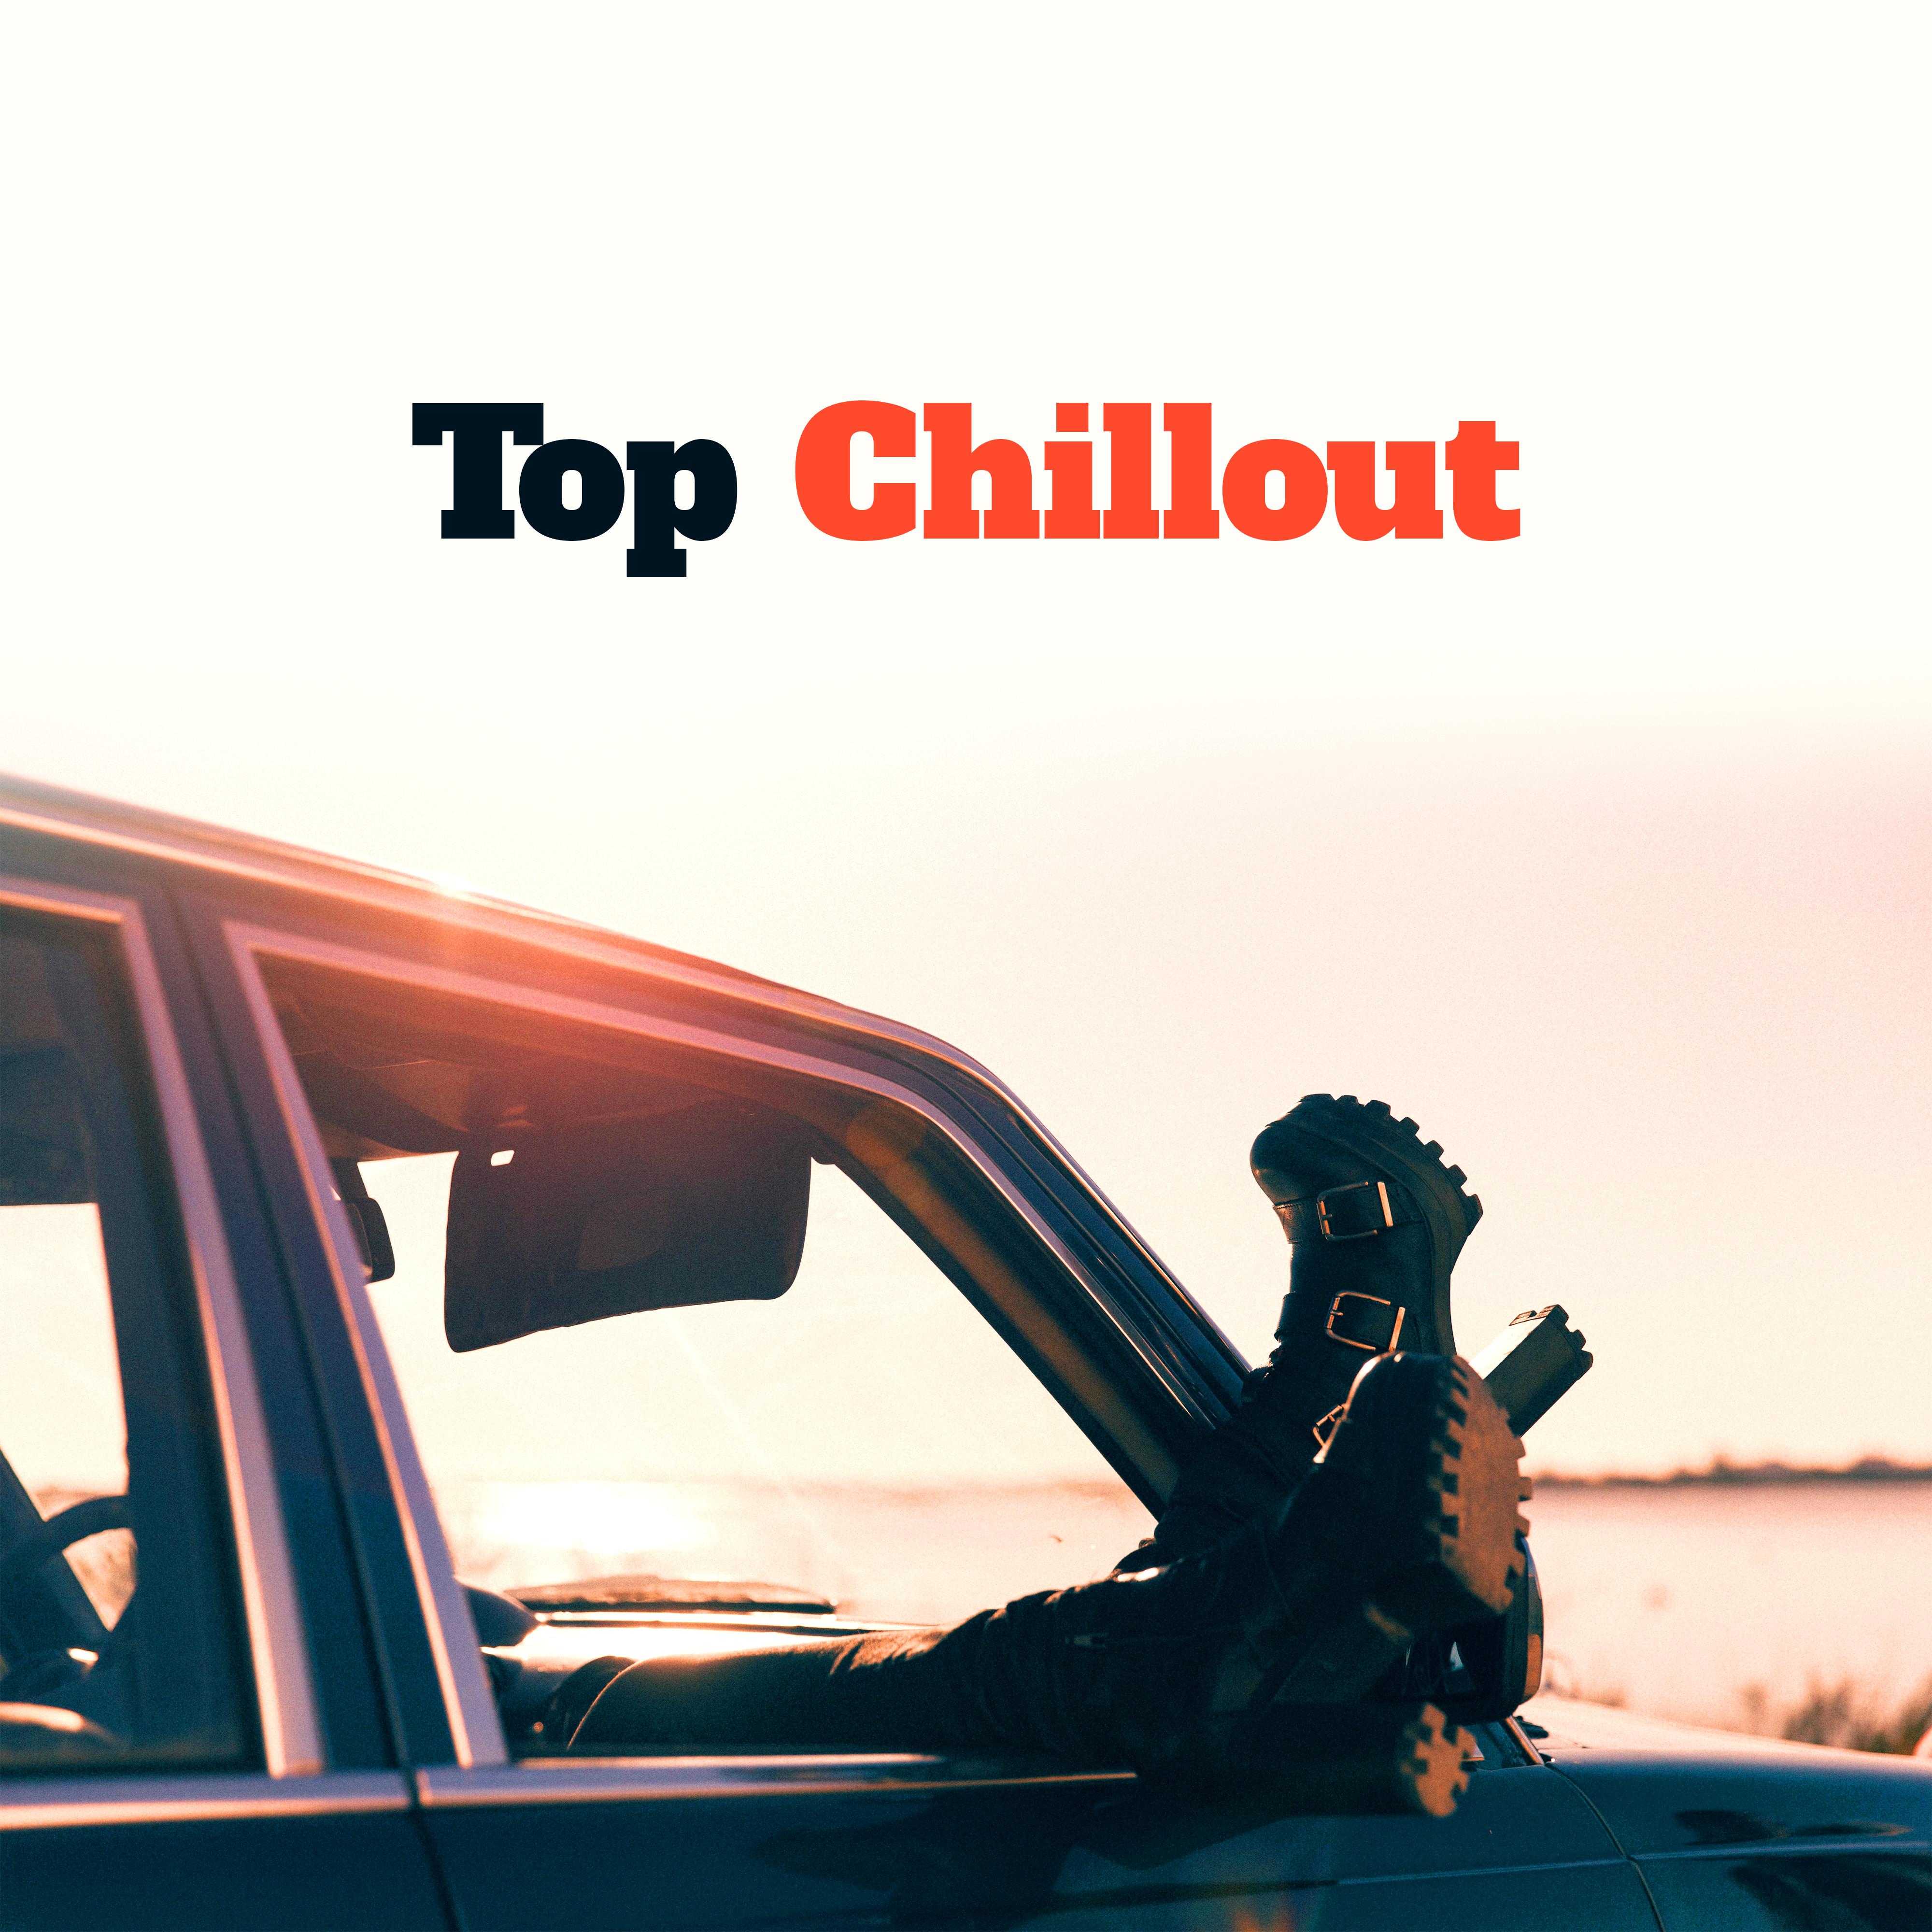 Top Chillout – Summer 2017, Chill Out Music, Relaxed Beats, Rest, Summertime Memories